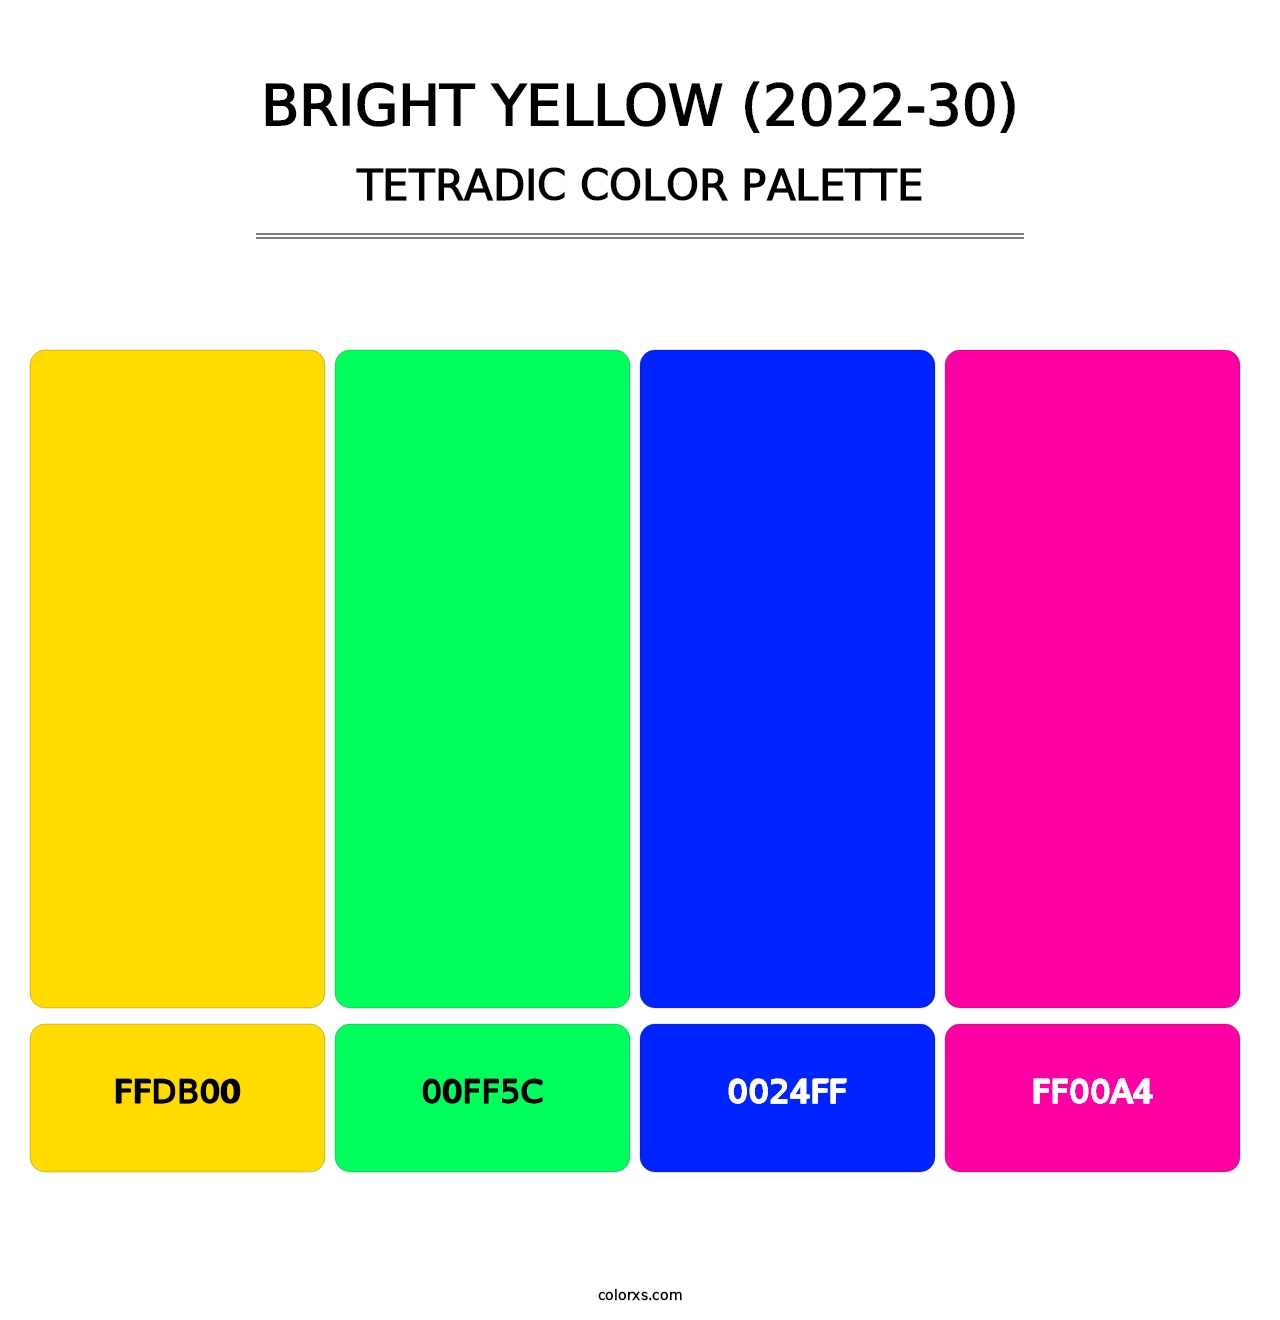 Bright Yellow (2022-30) - Tetradic Color Palette